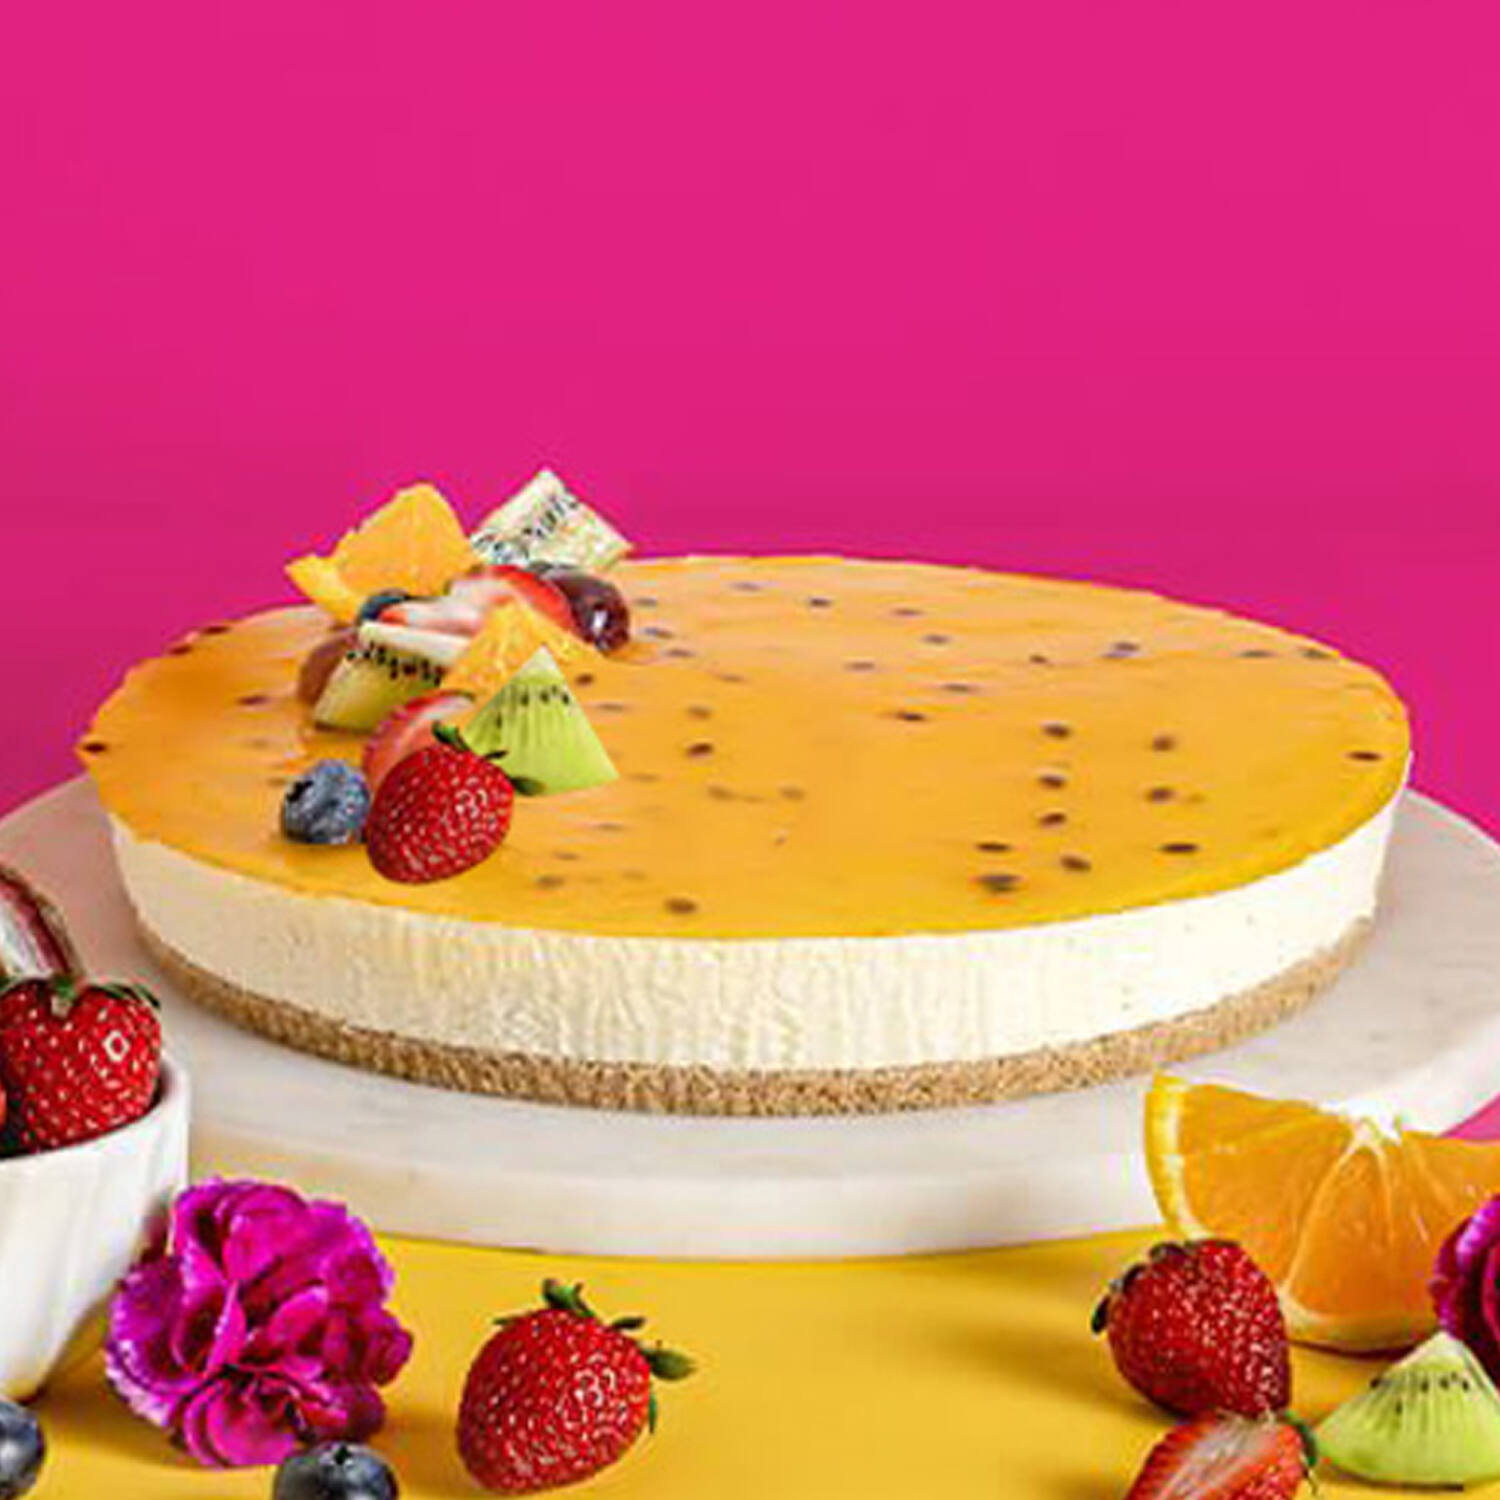 White Chocolate Cake with Passion Fruit Recipes | Woman & Home